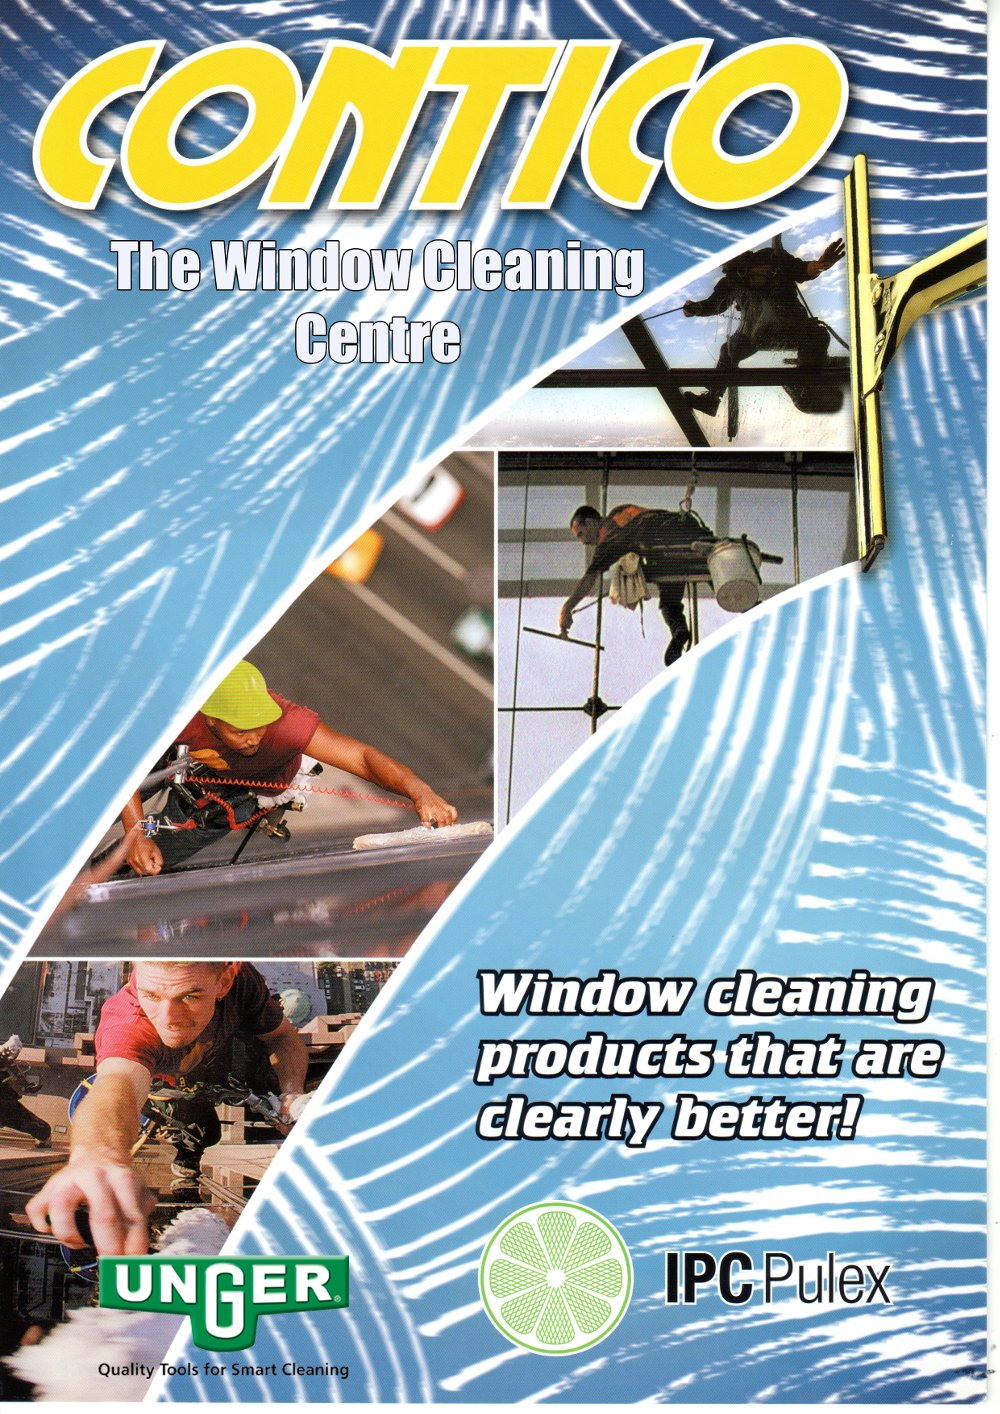 Professional Scraping Applicator Home Window Squeegee Cleaning